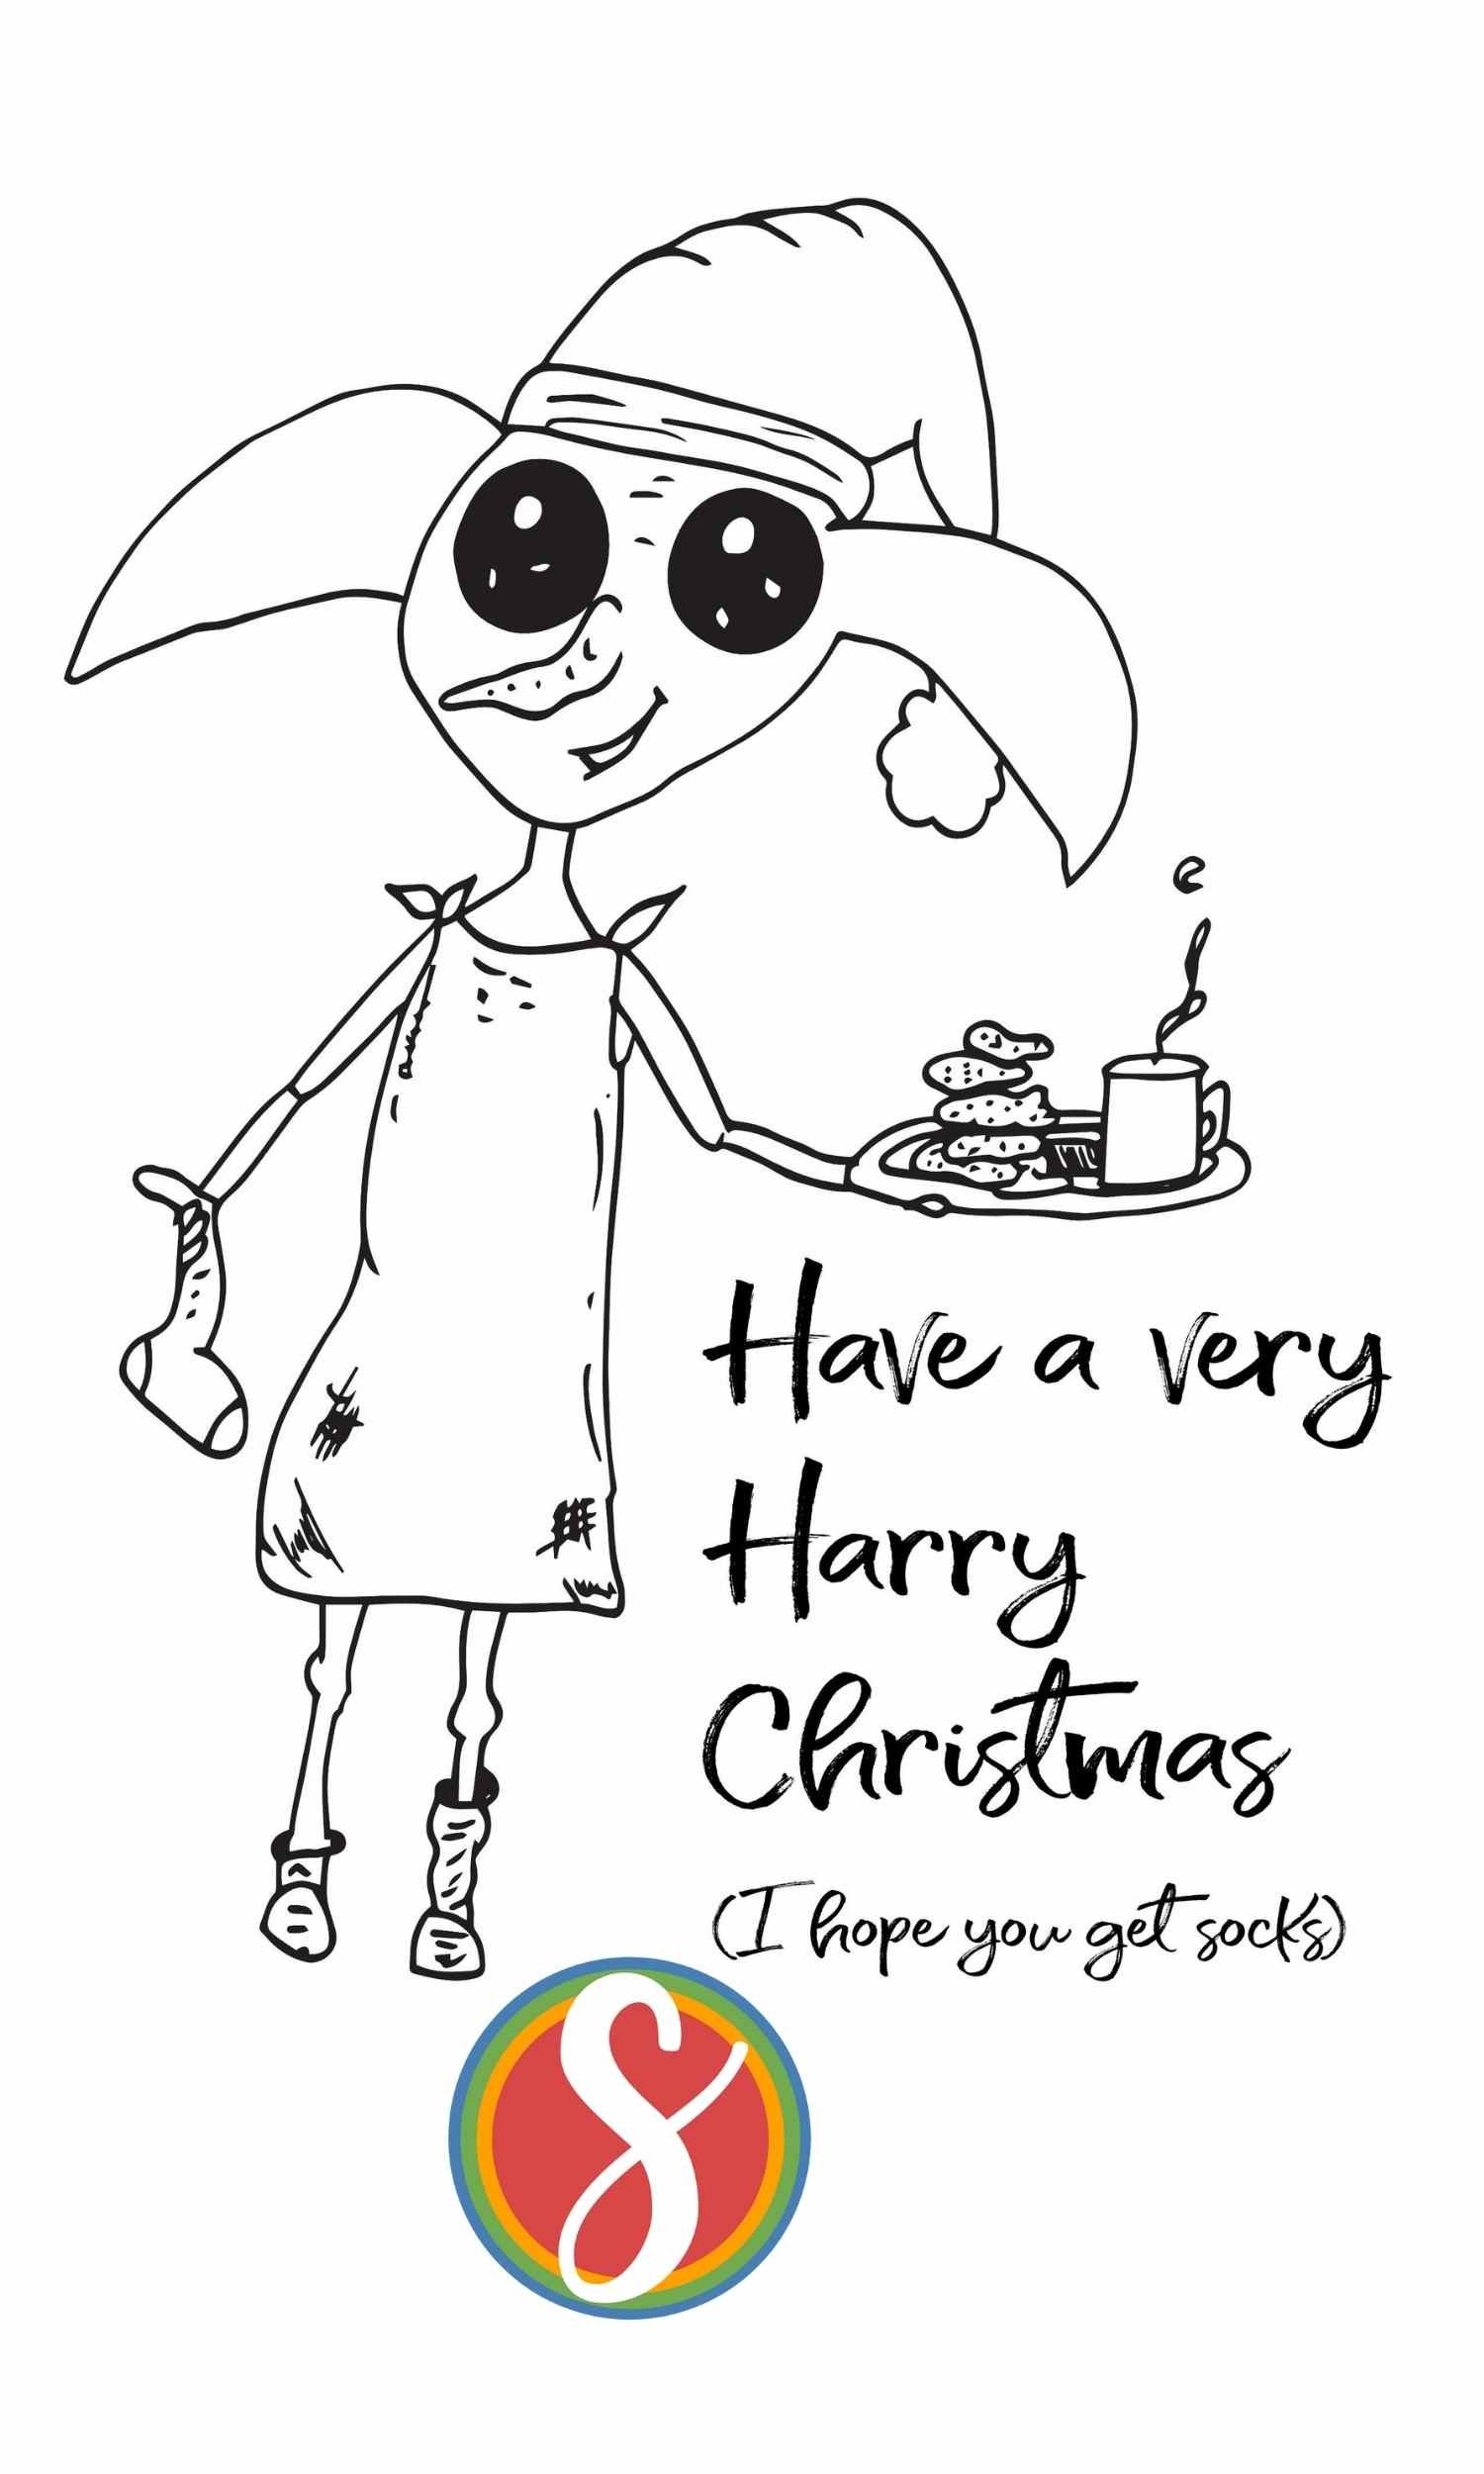 text reads "Have a very Harry Christmas" and has a colorable image of Dobby the house elf holding a  sock and a tray of cocoa and cookies